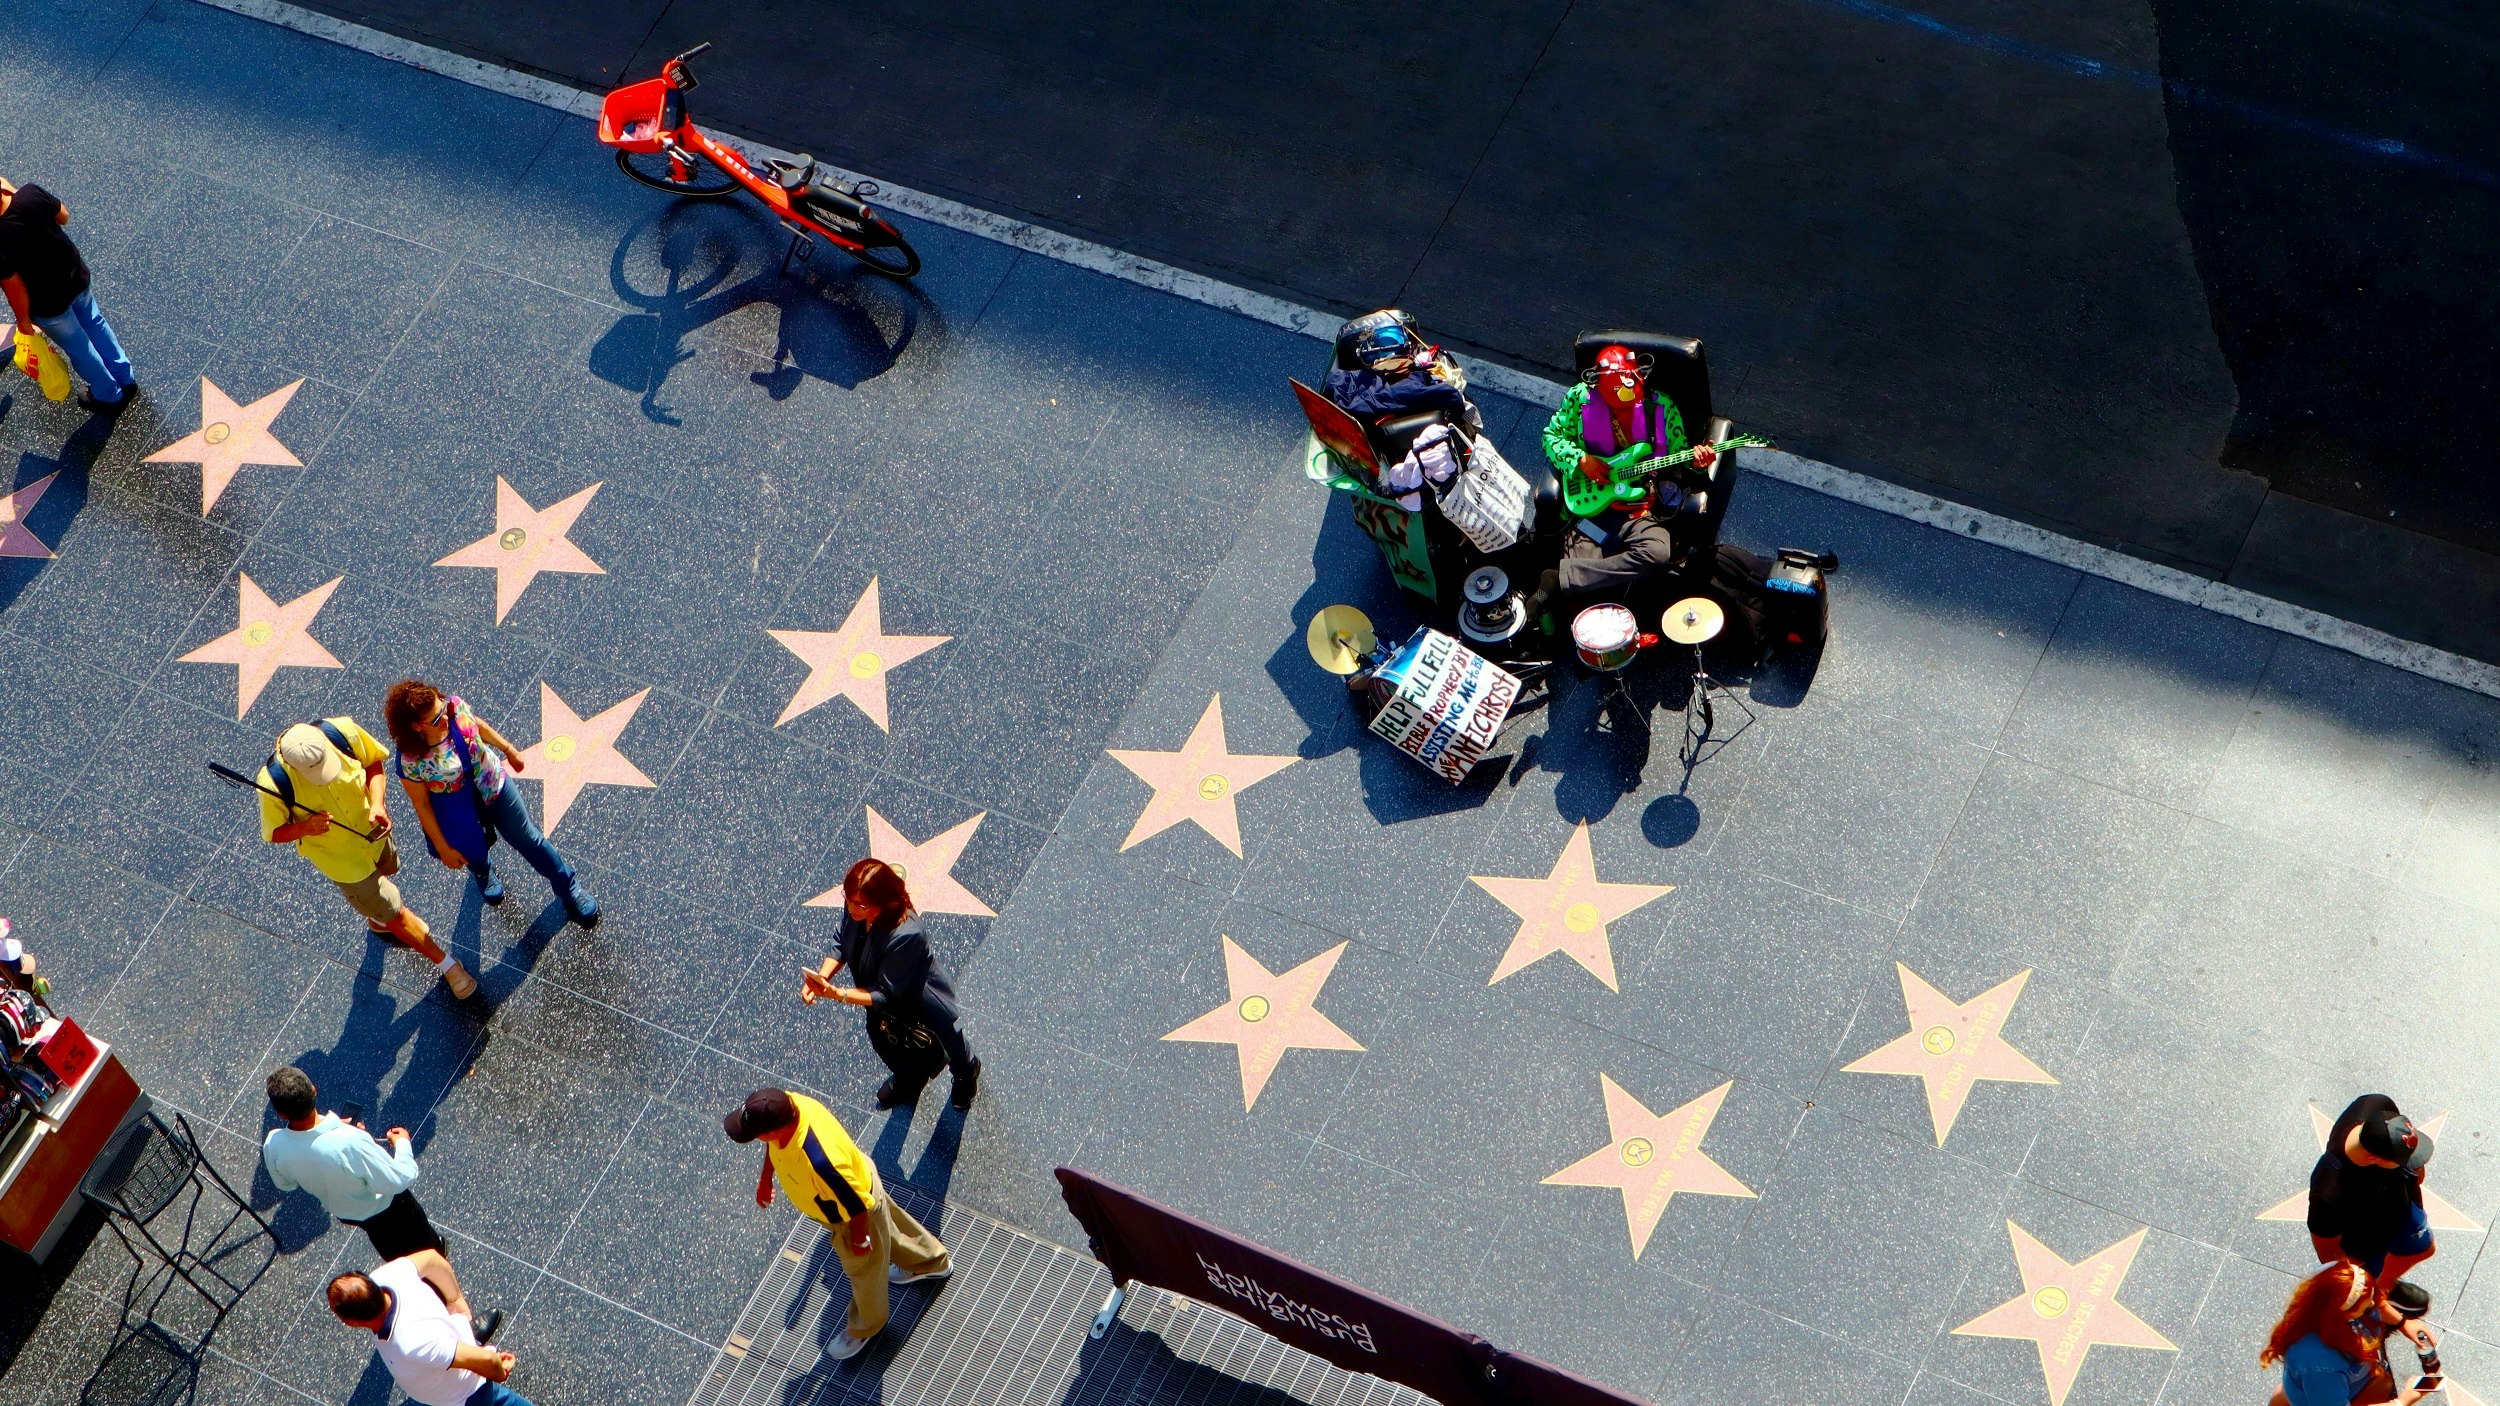 This image is looking down on a section of dark grey pavement with numerous large stars bedded into it, each of which carries the name of a famous person in show business; people walk to and fro.  